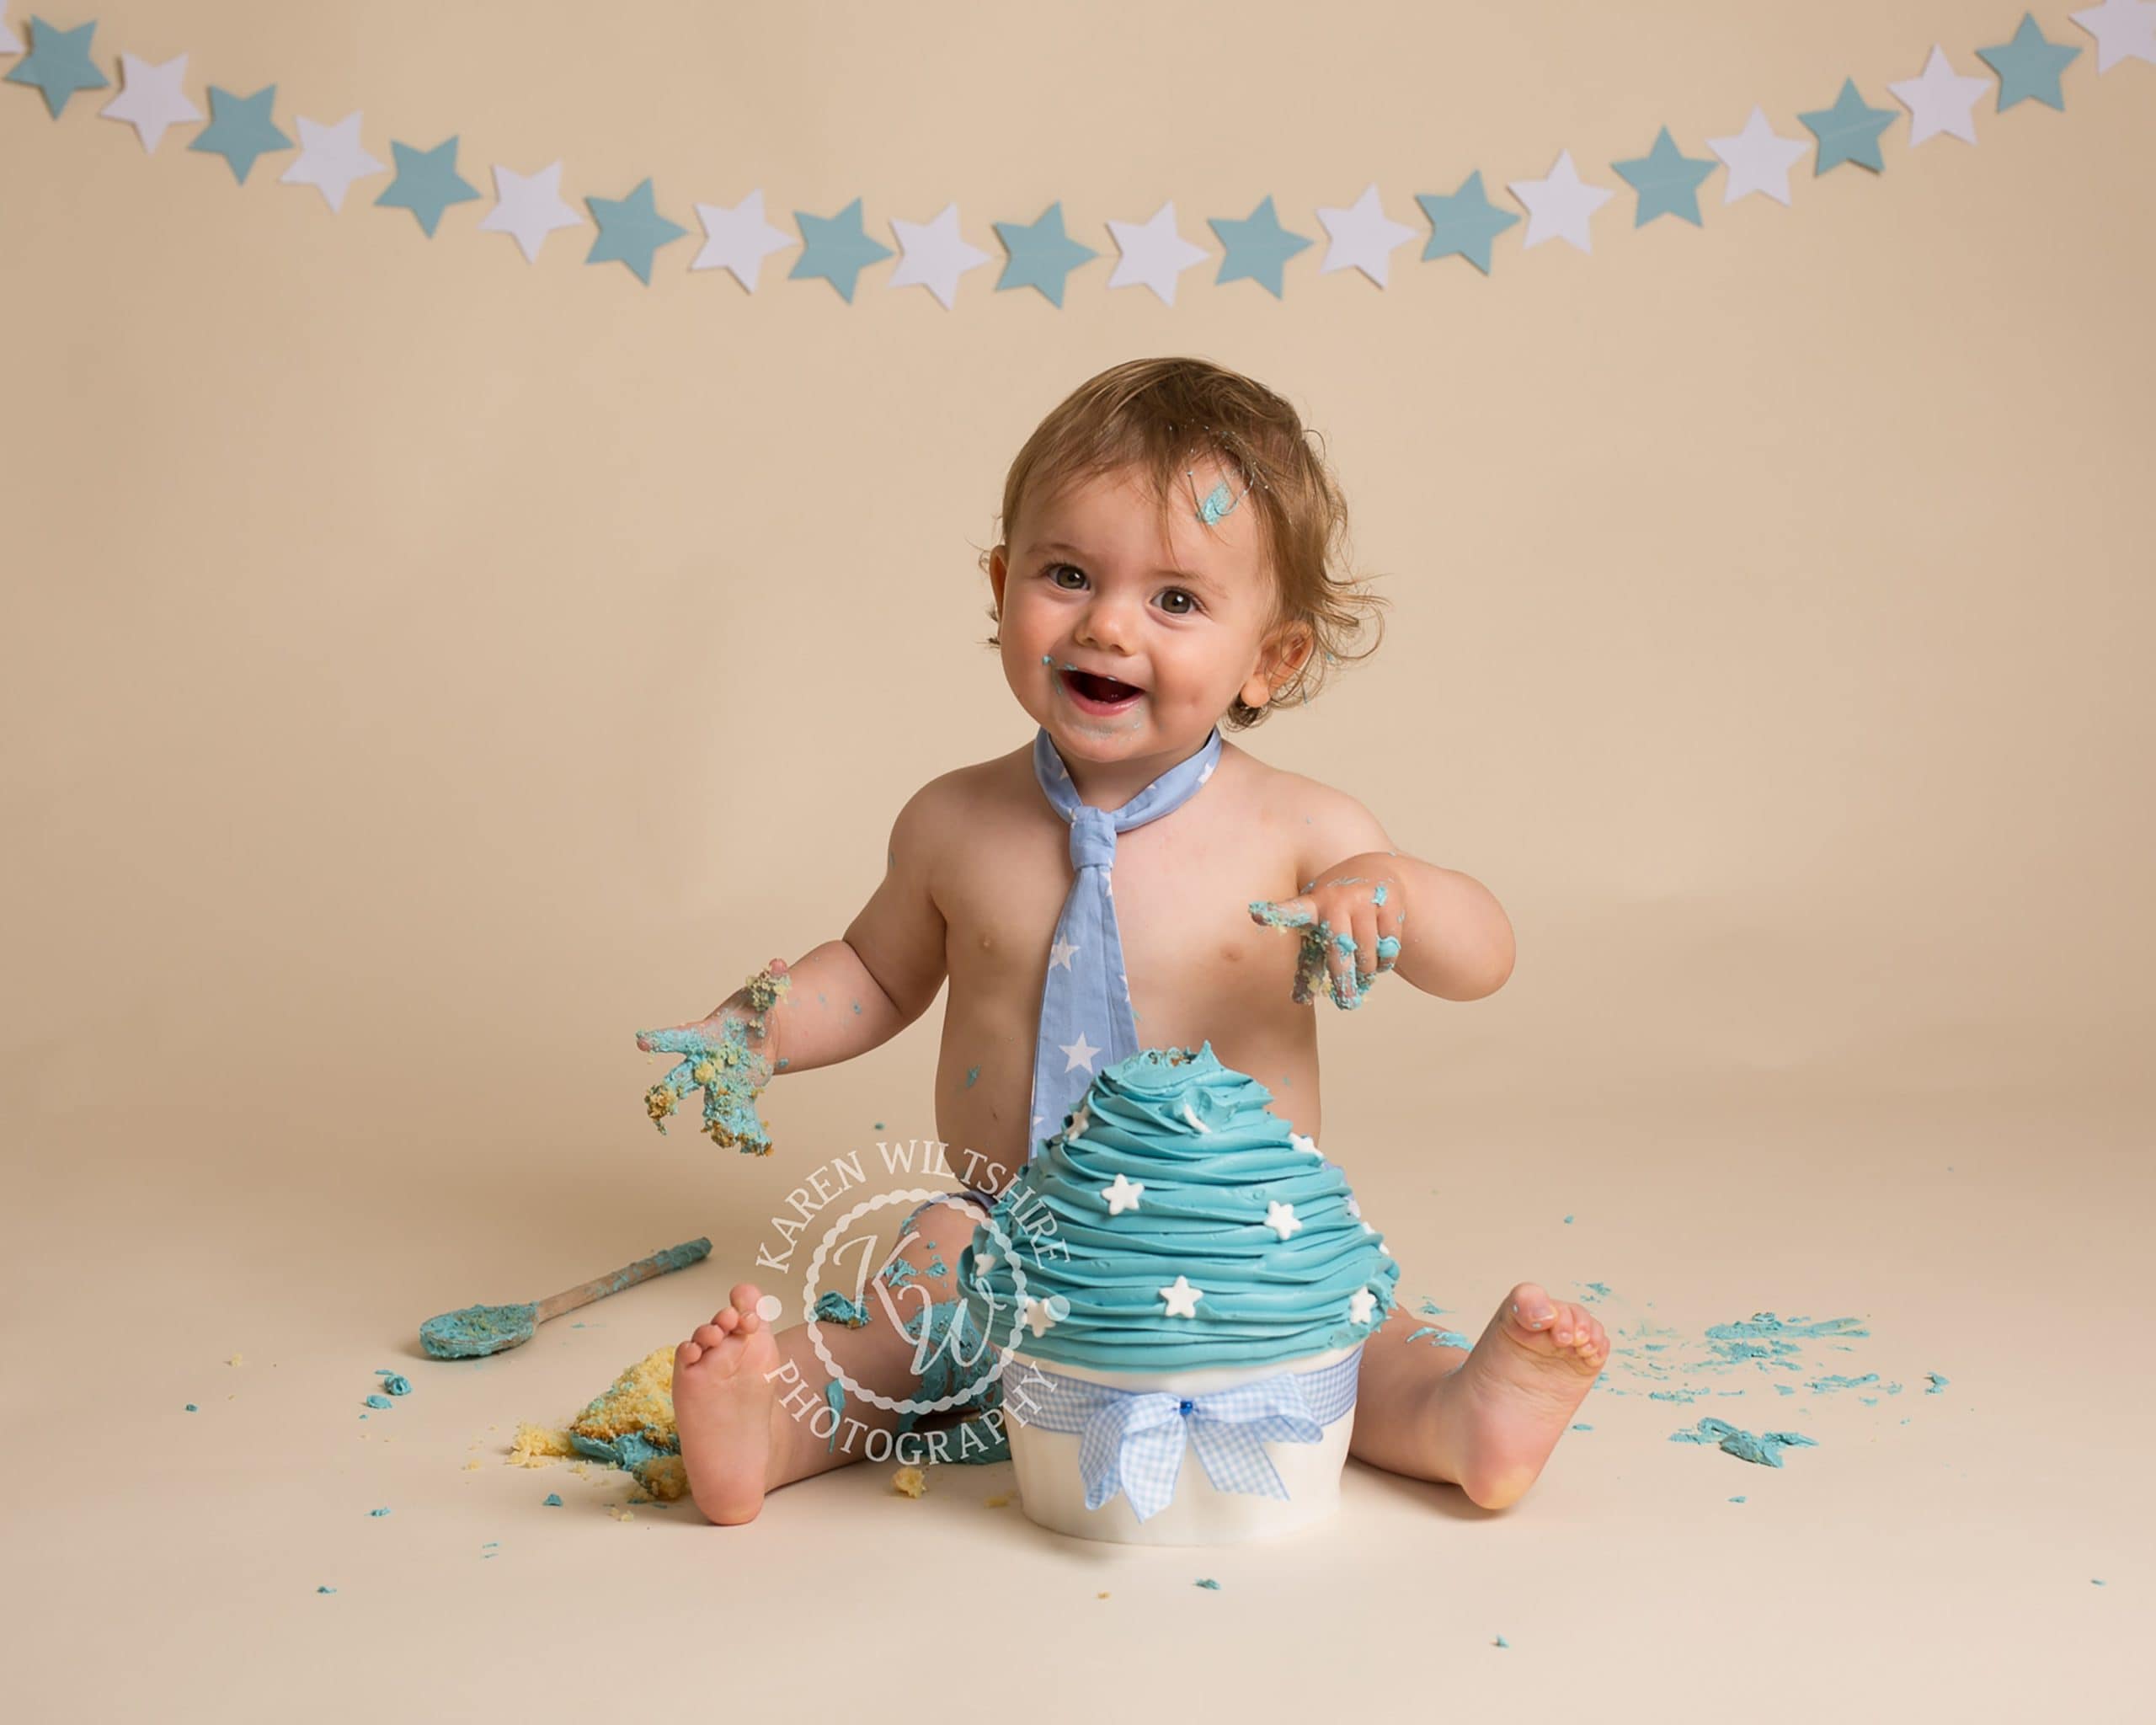 Baby boy covered in cake during his cake smash photoshoot